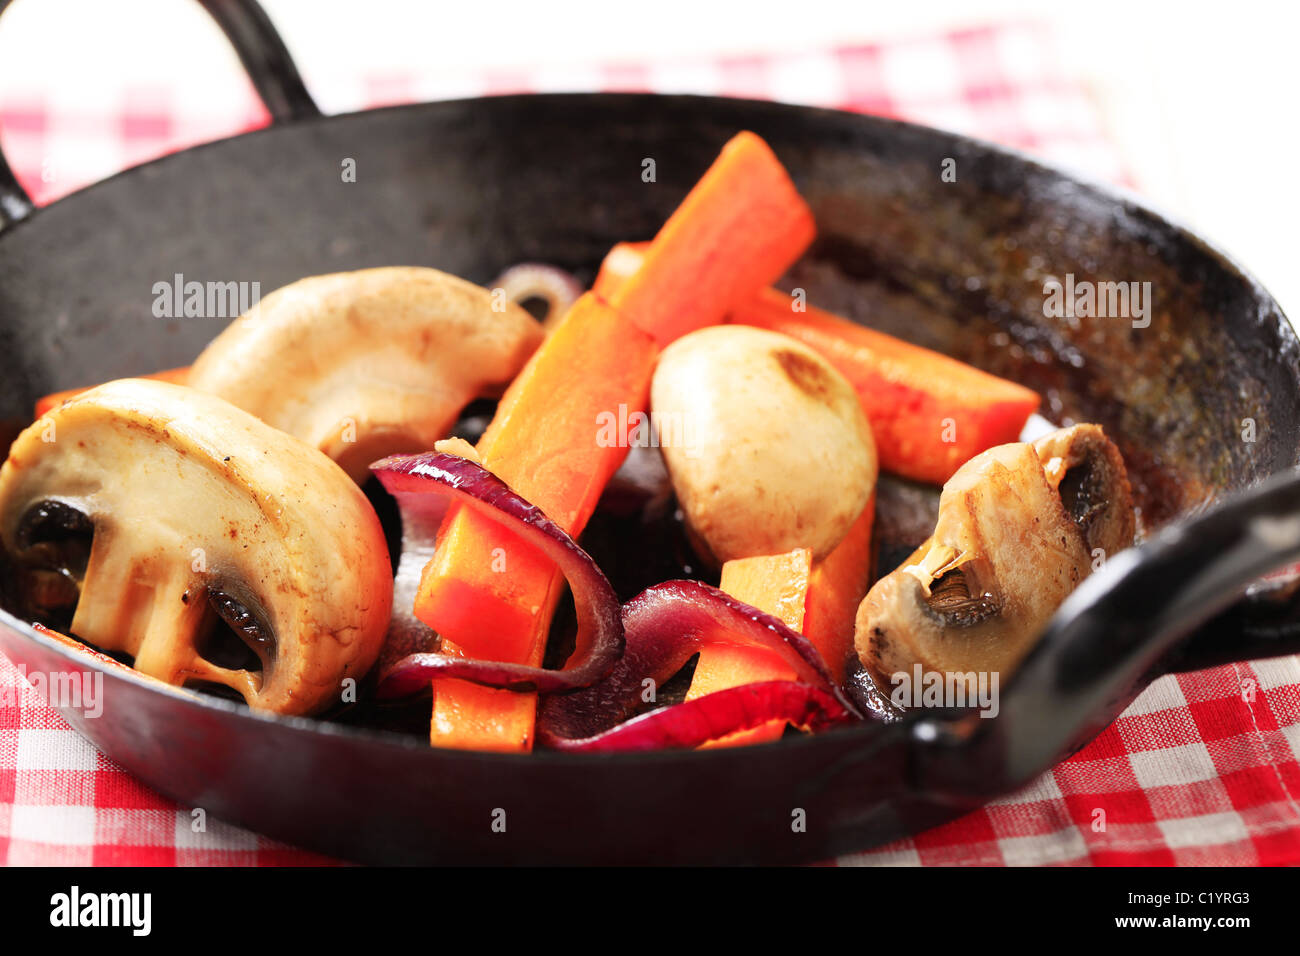 Pan roasted mushrooms, and strips of carrot Stock Photo